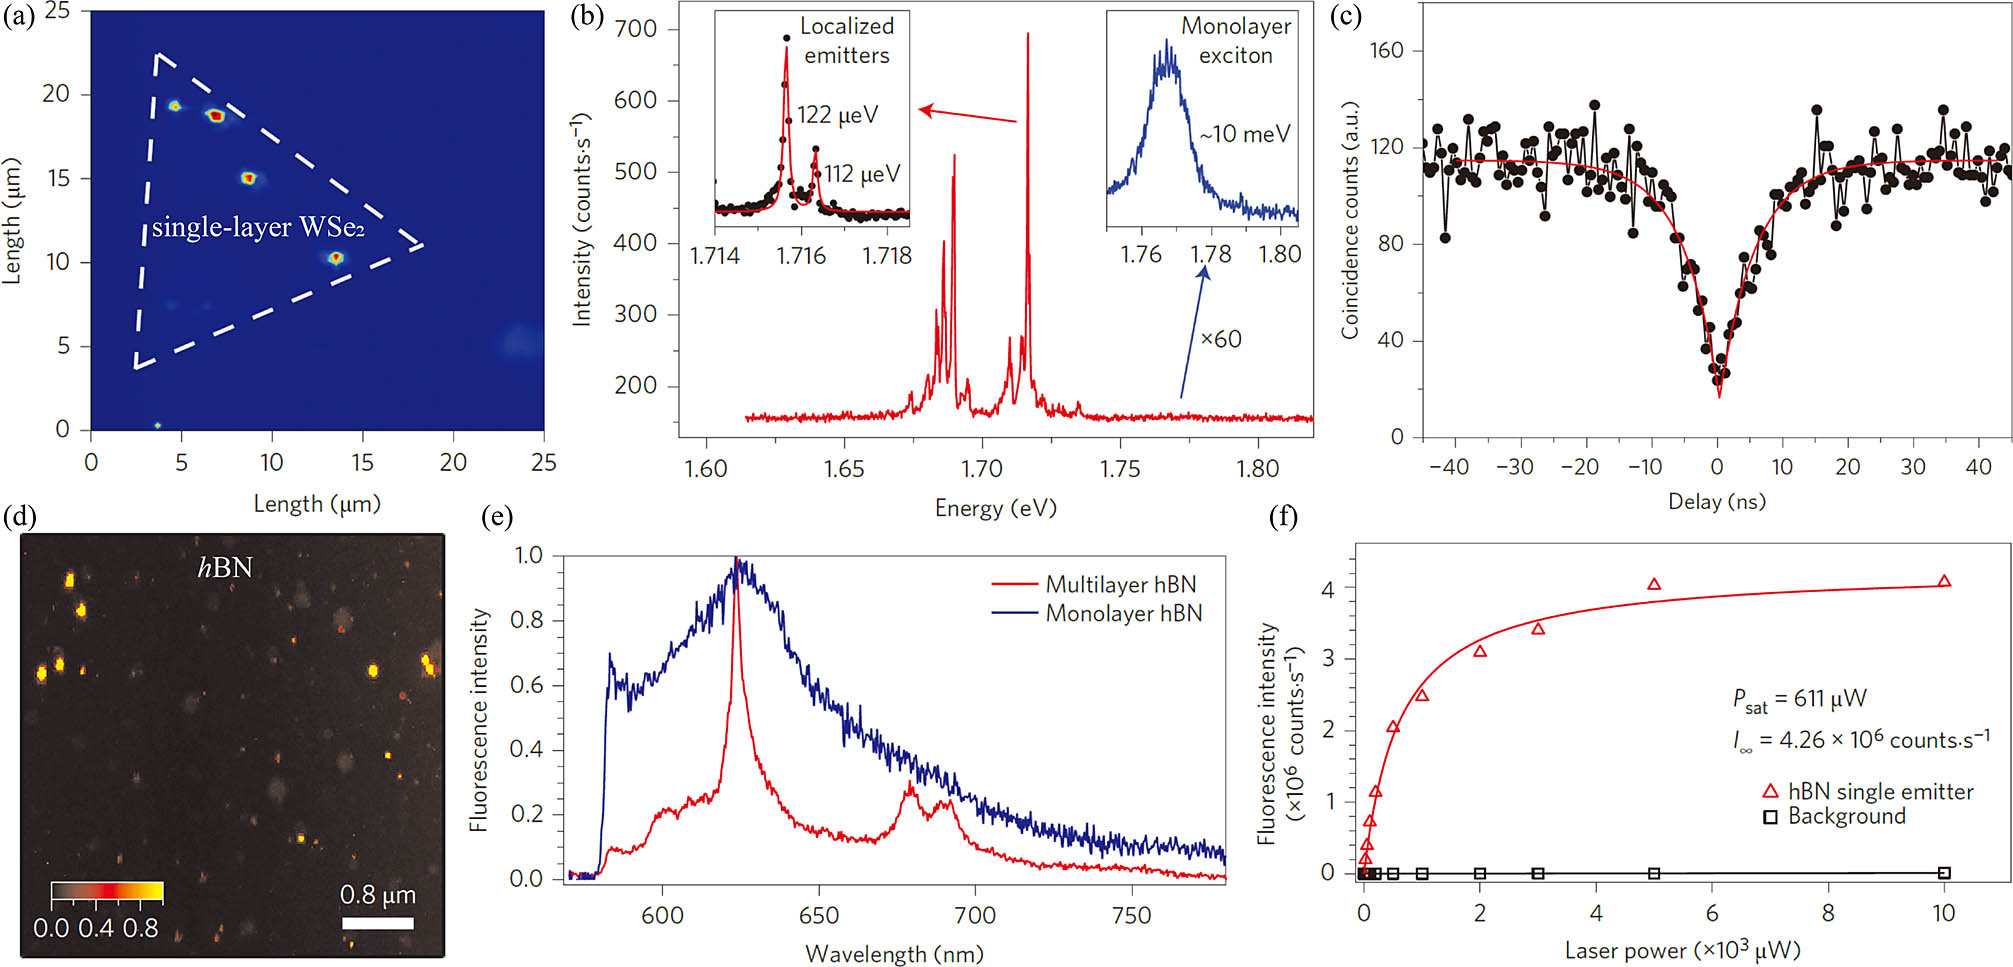 Single-photon emitters in 2D materials. (a) Photoluminescence (PL) intensity map of narrow emission lines within a spectral width of 12 meV centered at 1.719 eV, over a 25 μm × 25 μm area. The dashed triangle indicates the position of the monolayer[18]. (b) PL spectrum of localized emitters. The left inset is a high-resolution spectrum of the highest intensity peak. The right inset is a zoom-in of the monolayer exciton emission. The emission of the localized emitters exhibits a red shift and much sharper spectral lines[18]. (c) Second-order correlation measurement of the PL from quantum emission under a 6.8 μW continuous wave (CW) laser excitation at 637 nm. The red line is a fit to the data with an extracted g2(0) of 0.14 ± 0.04[18]. (d) Scanning confocal map of a multilayer hBN sample showing bright luminescent spots, some of which correspond to emission from single defects[22]. (e) Room-temperature PL spectra of a defect center in hBN monolayer (blue trace) and multilayer (red trace)[22]. (f) Fluorescence saturation curve obtained from a single defect, showing a maximum emission rate of 4.26 MHz[22].